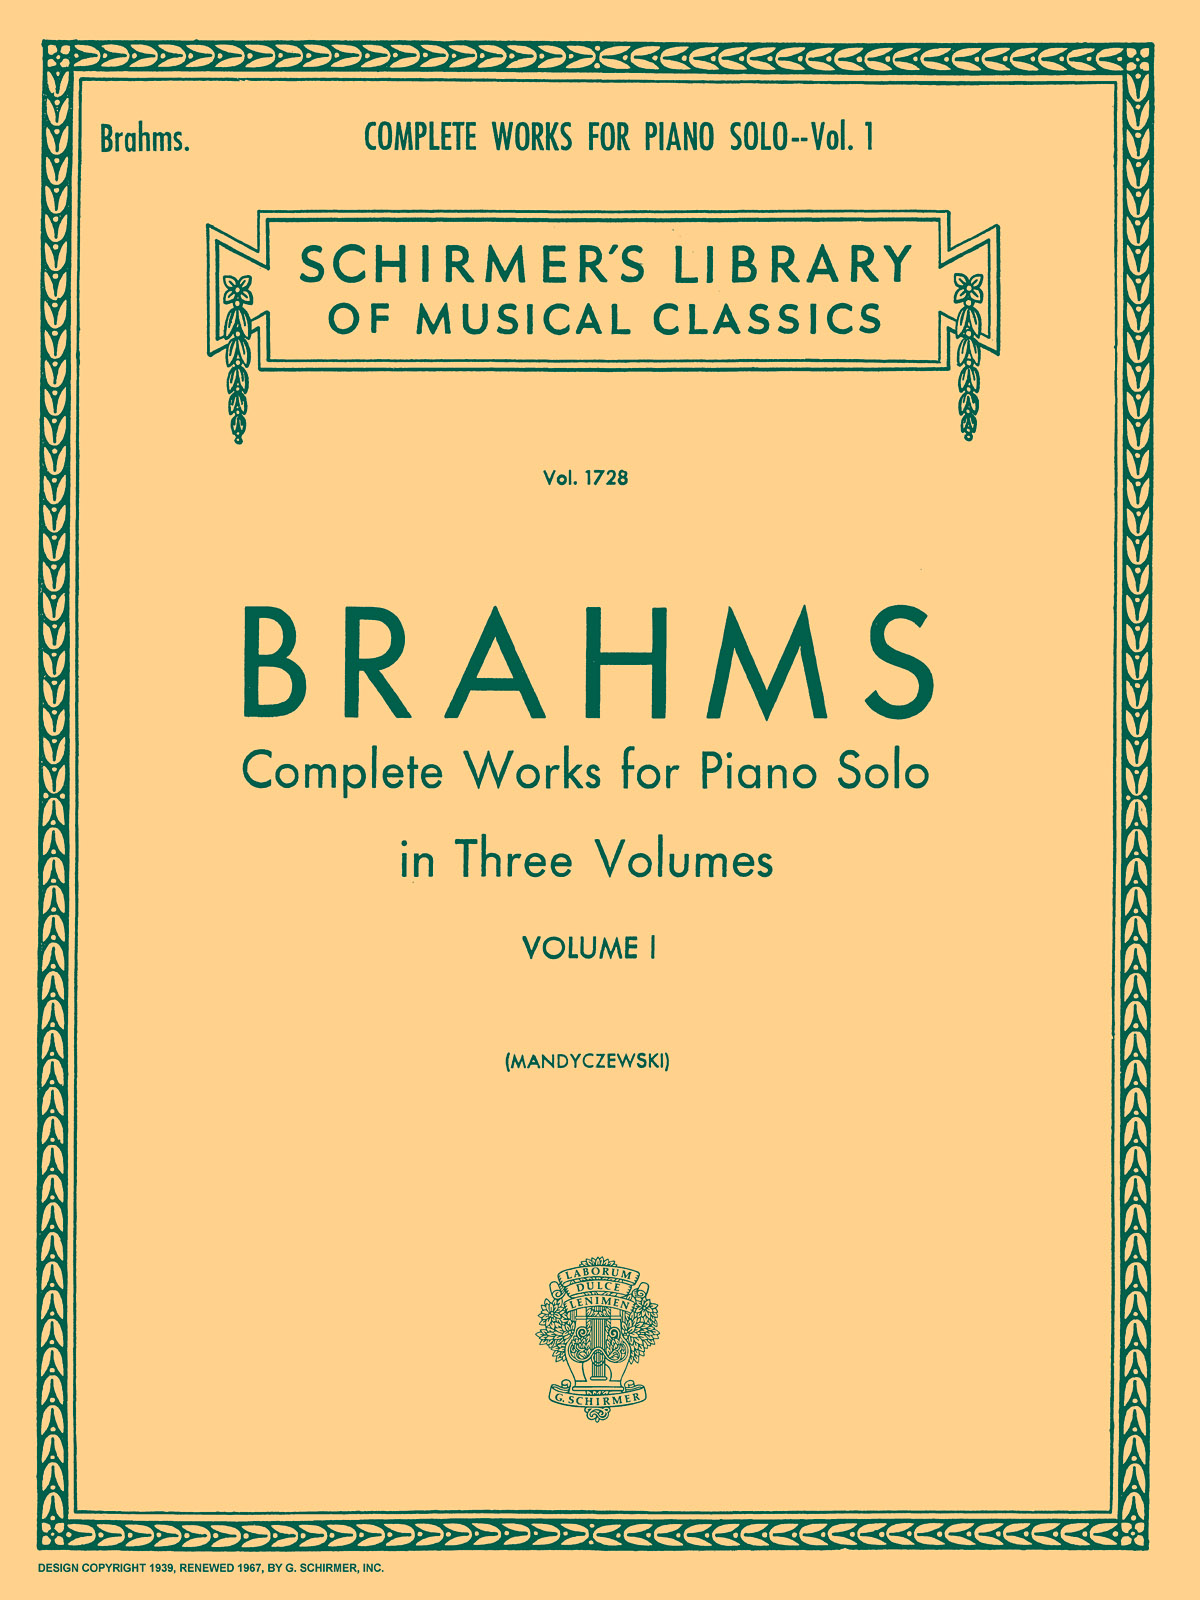 Brahms: Complete Works for Piano Solo – Volume 1